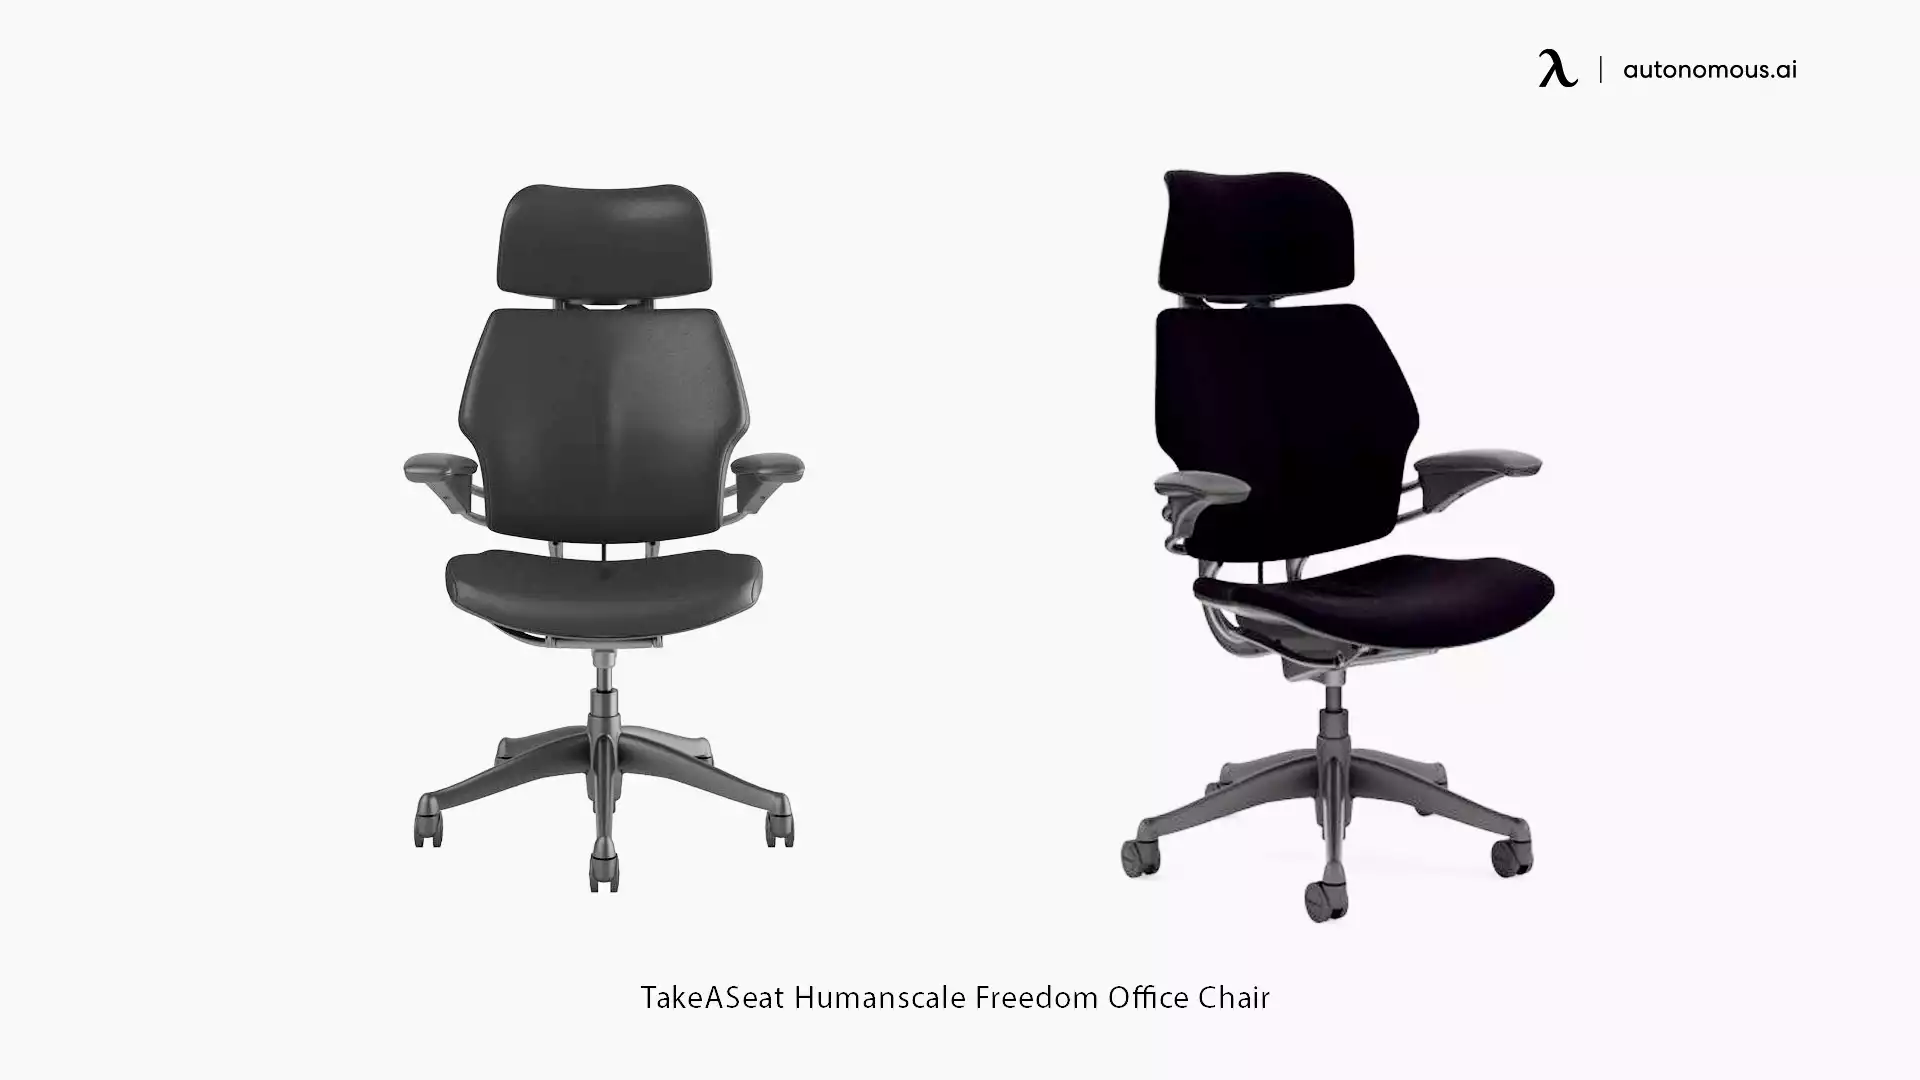 Freedom Headrest from Humanscale